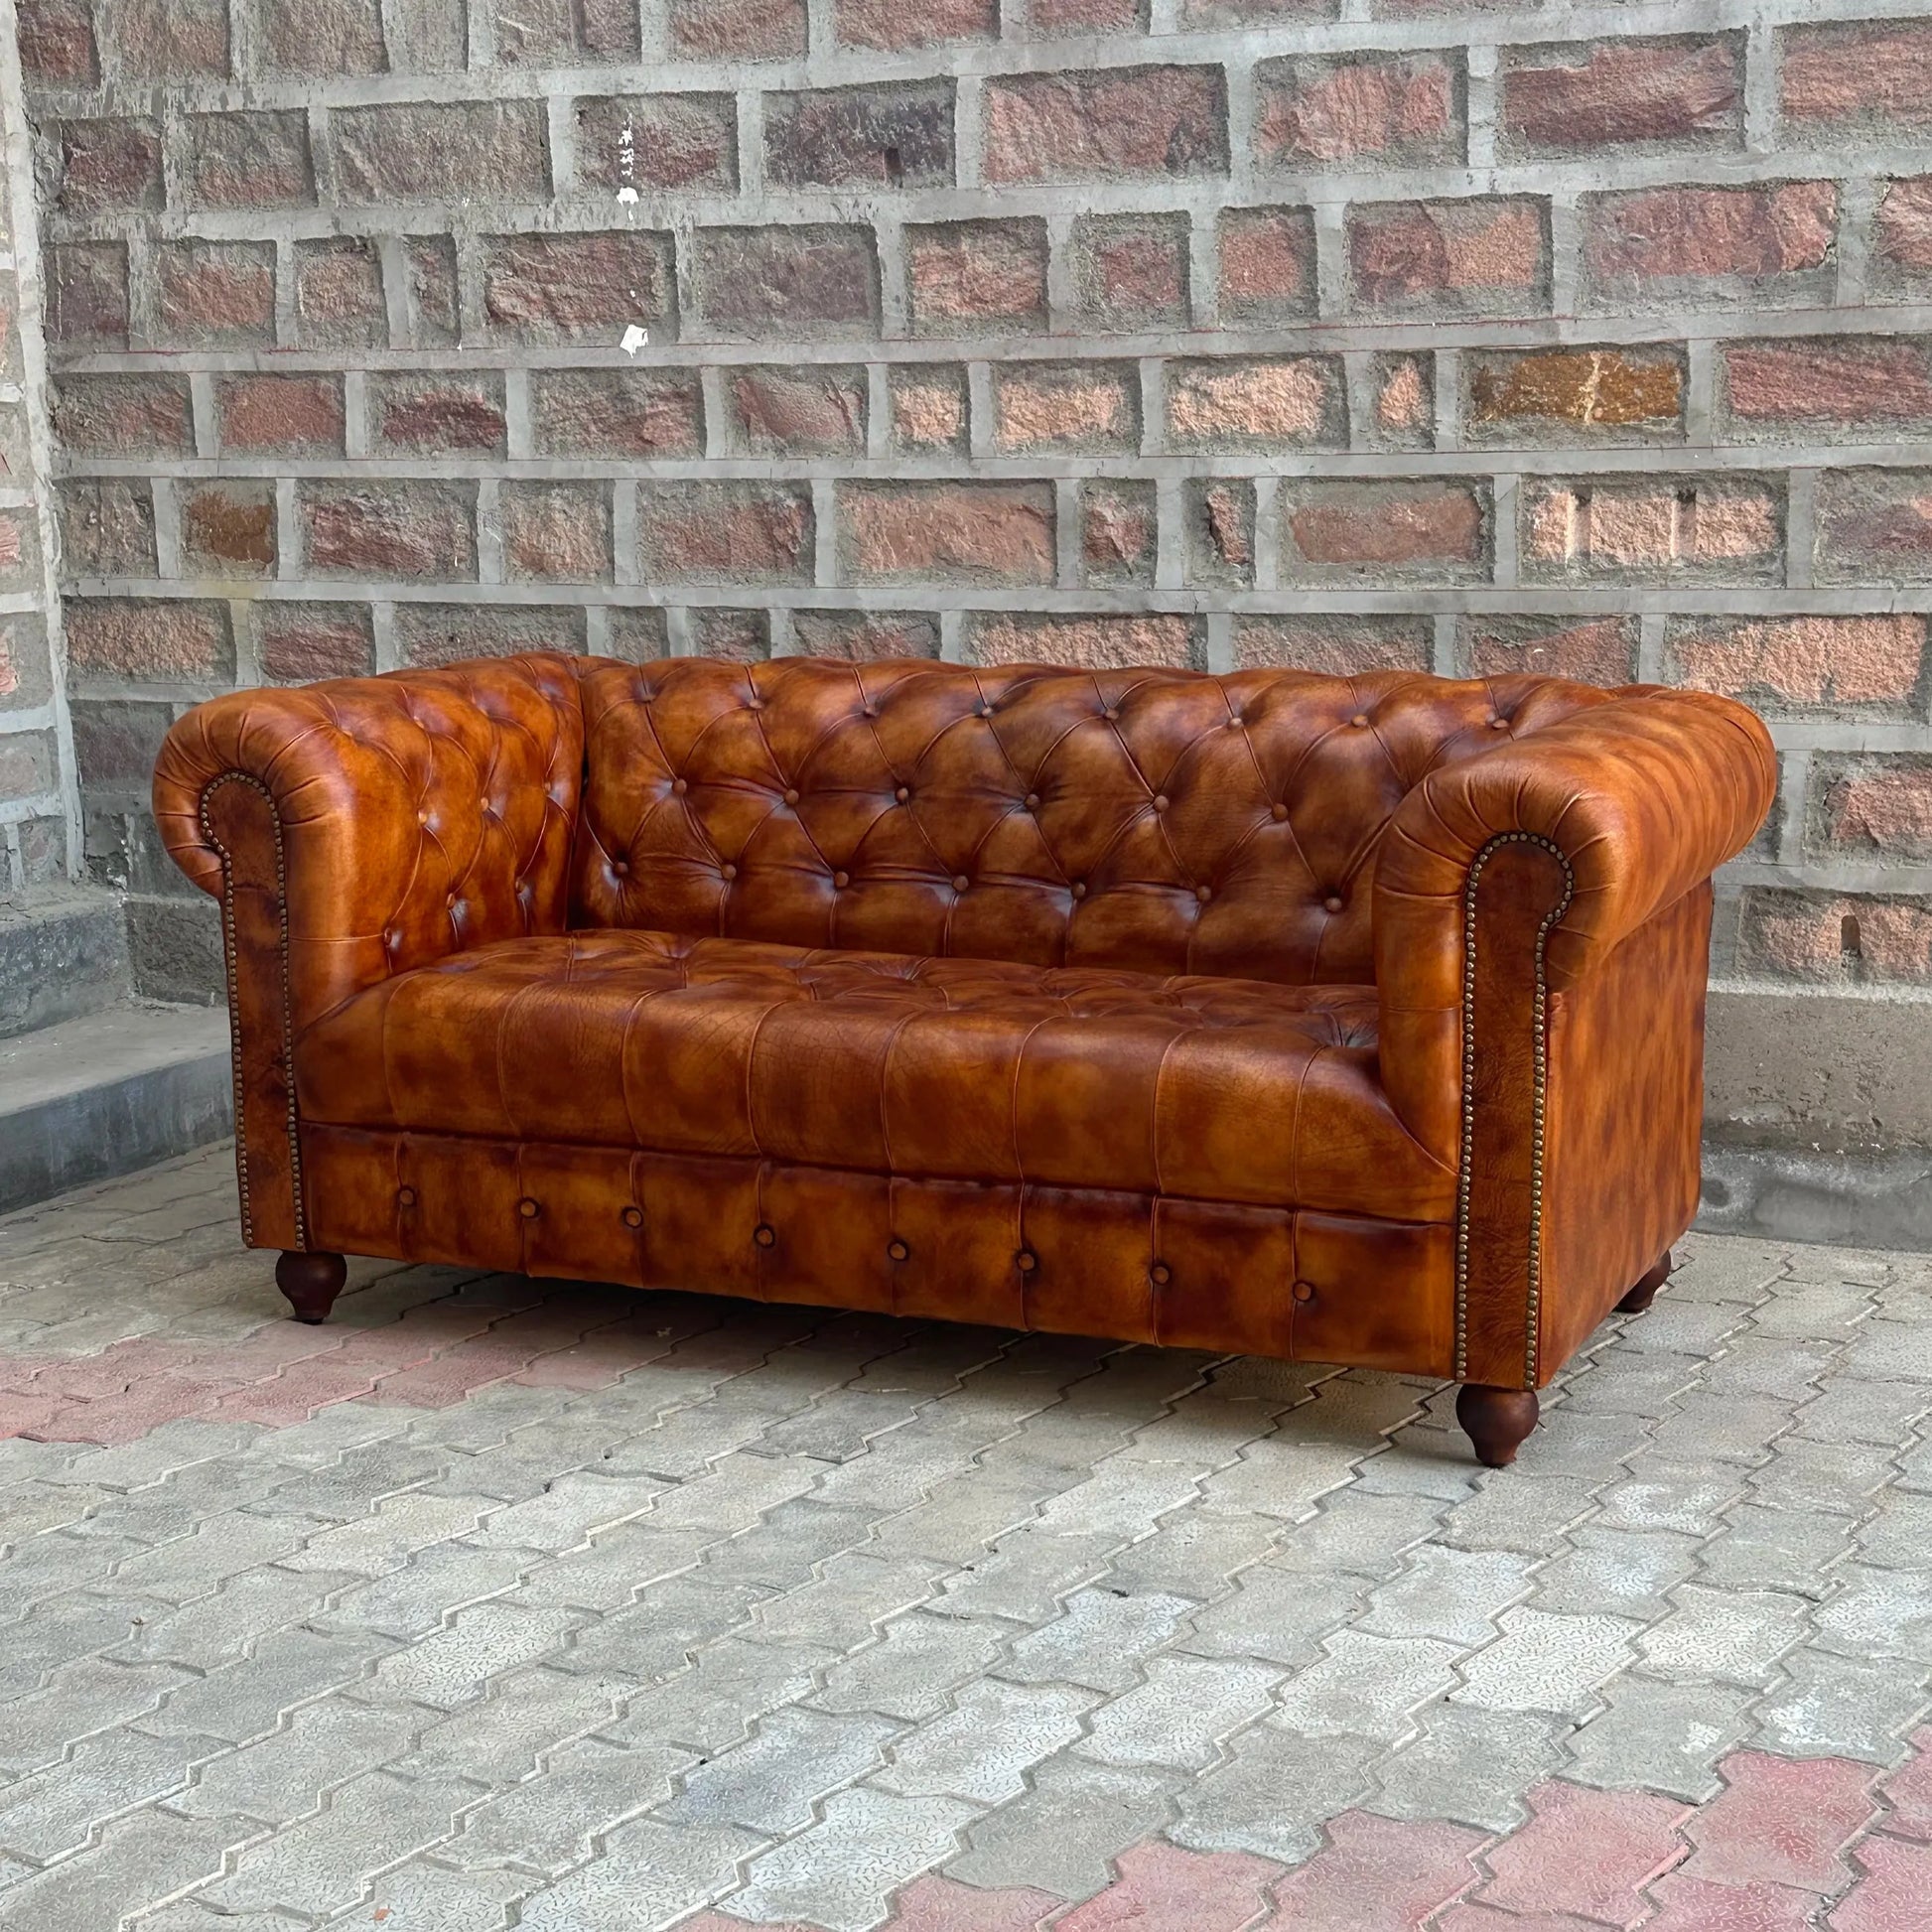 71" Loveseat Tufted Bench | Laramie Chesterfield Leather Loveseat with Tufted Bench Seats (LA-2T) by Rising Tide Design Co.